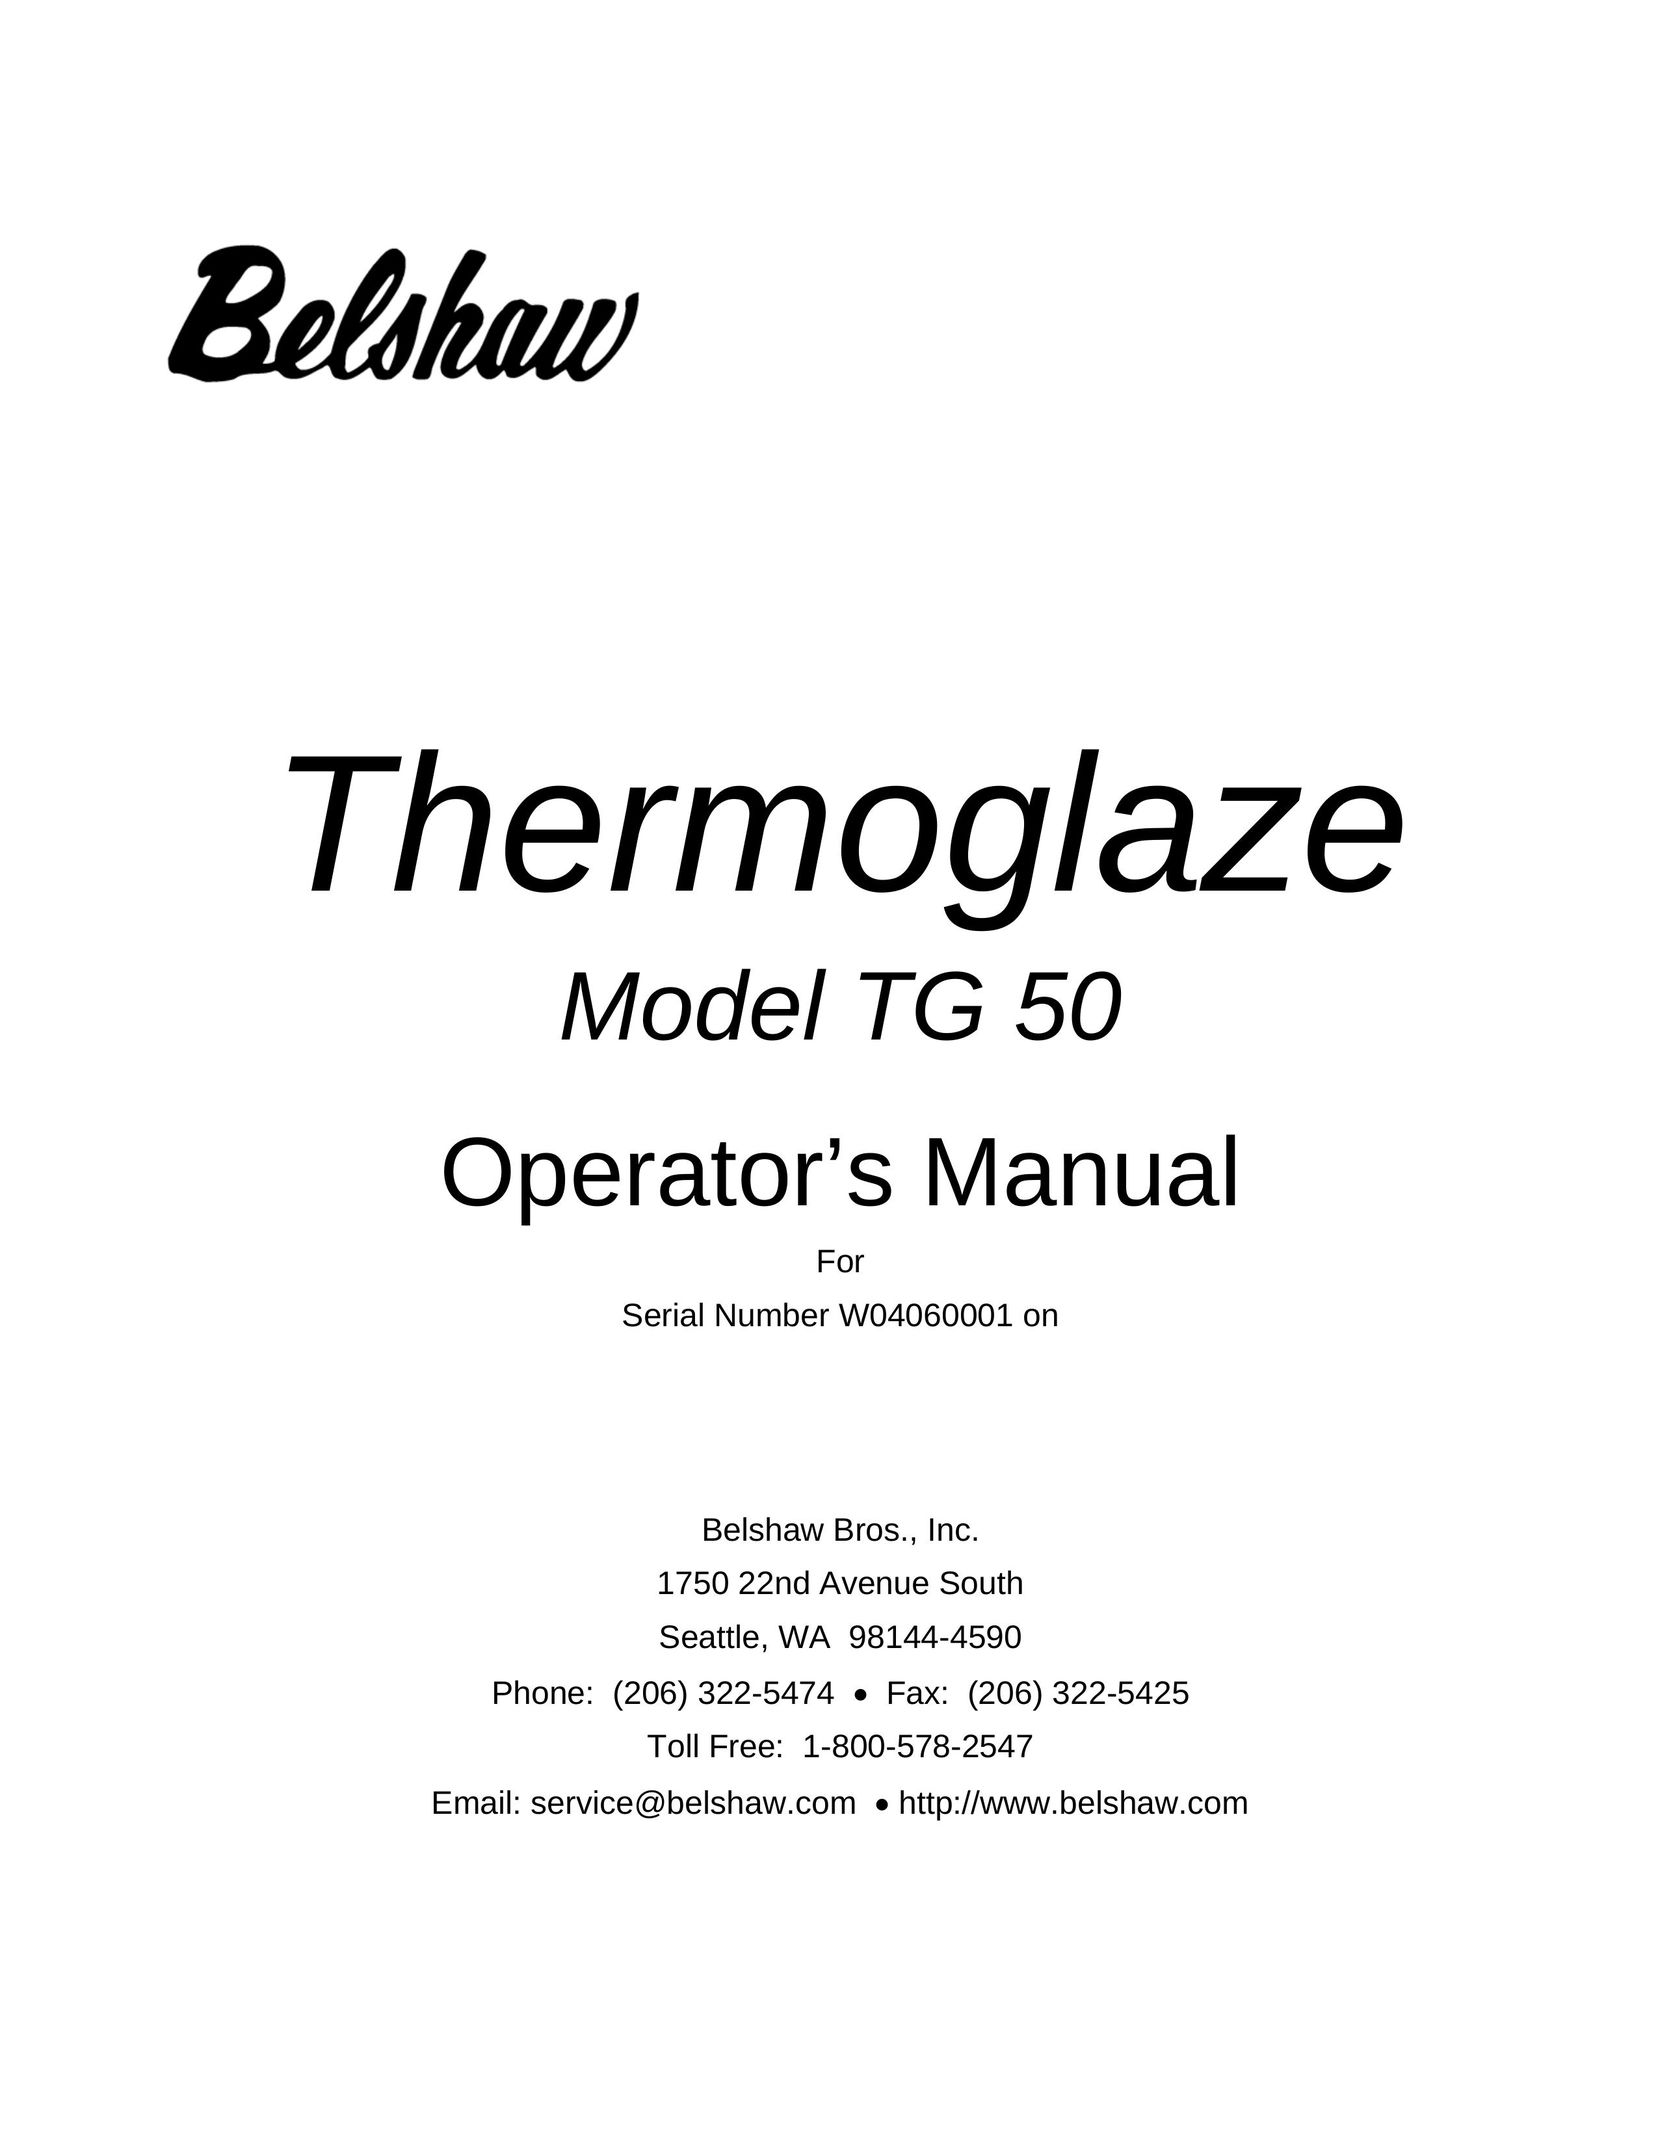 Belshaw Brothers TG 50 Microwave Oven User Manual